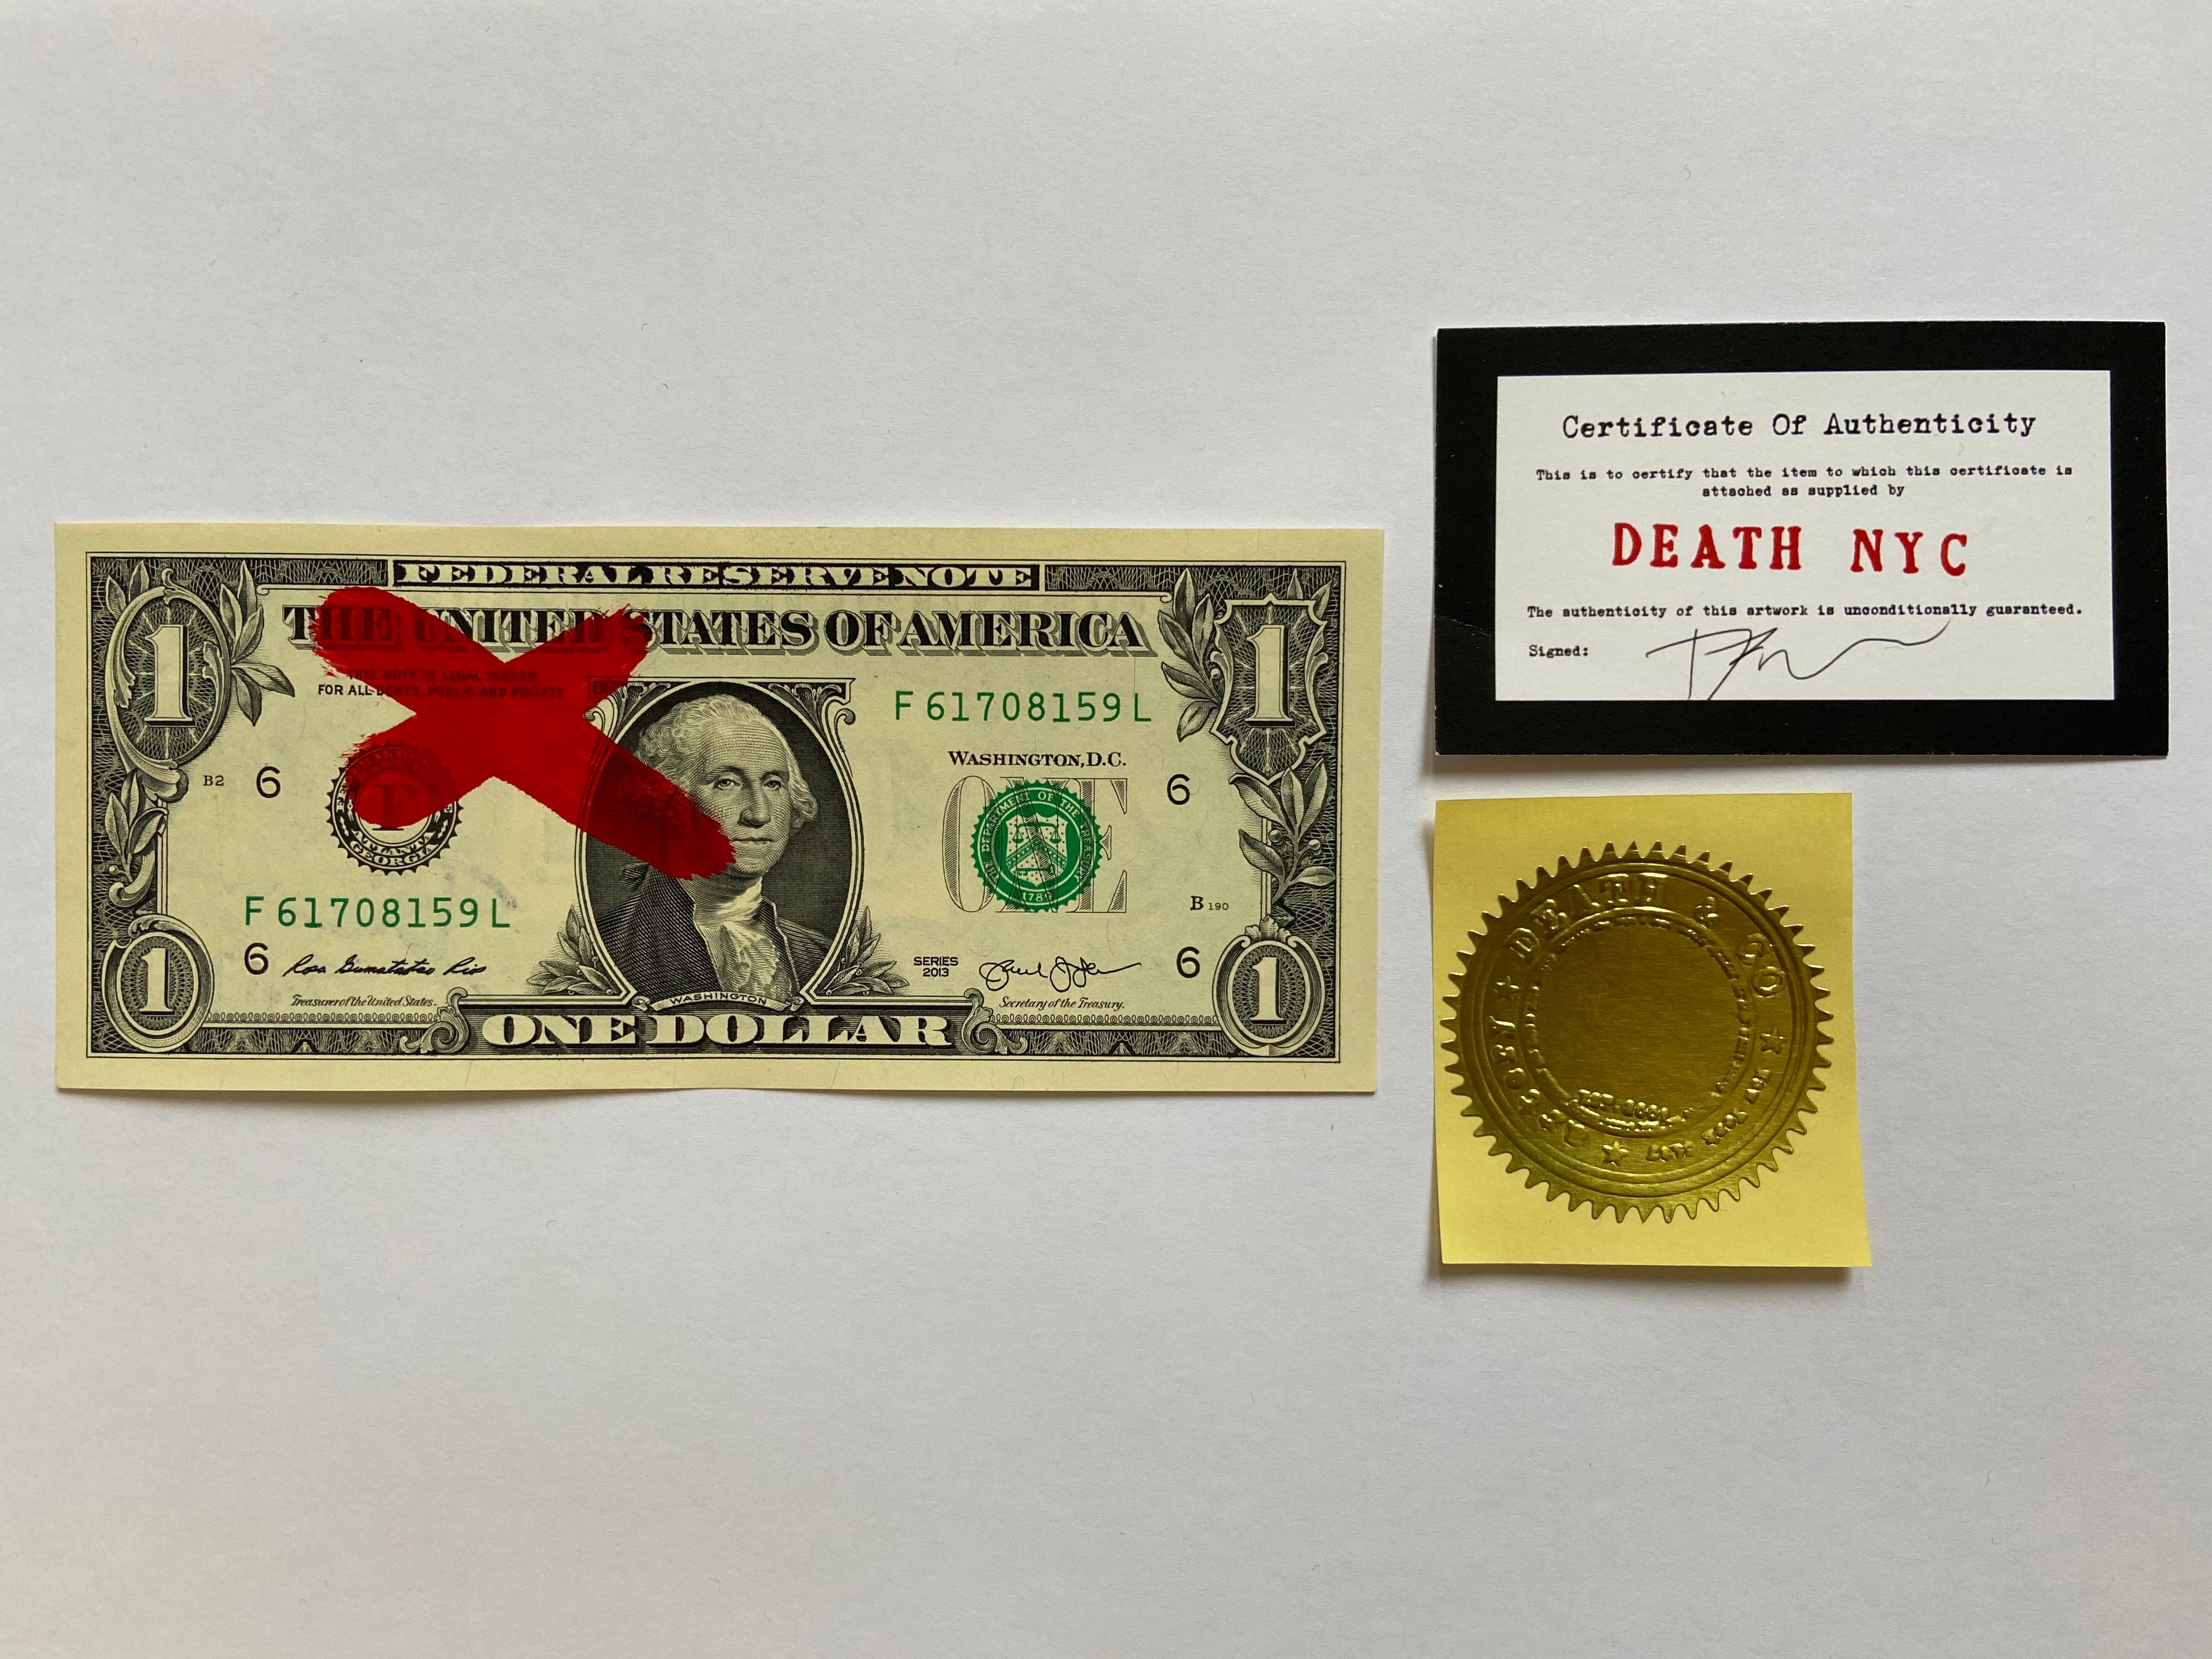 Death NYC

LEFT CROSS
2017
Gluing on 1 dollar notes
Signed by the artist
Size: 7 x 15.5 cm
Original copy, delivered with certificate of authenticity and stamp of the artist
Perfect condition 
99 euros